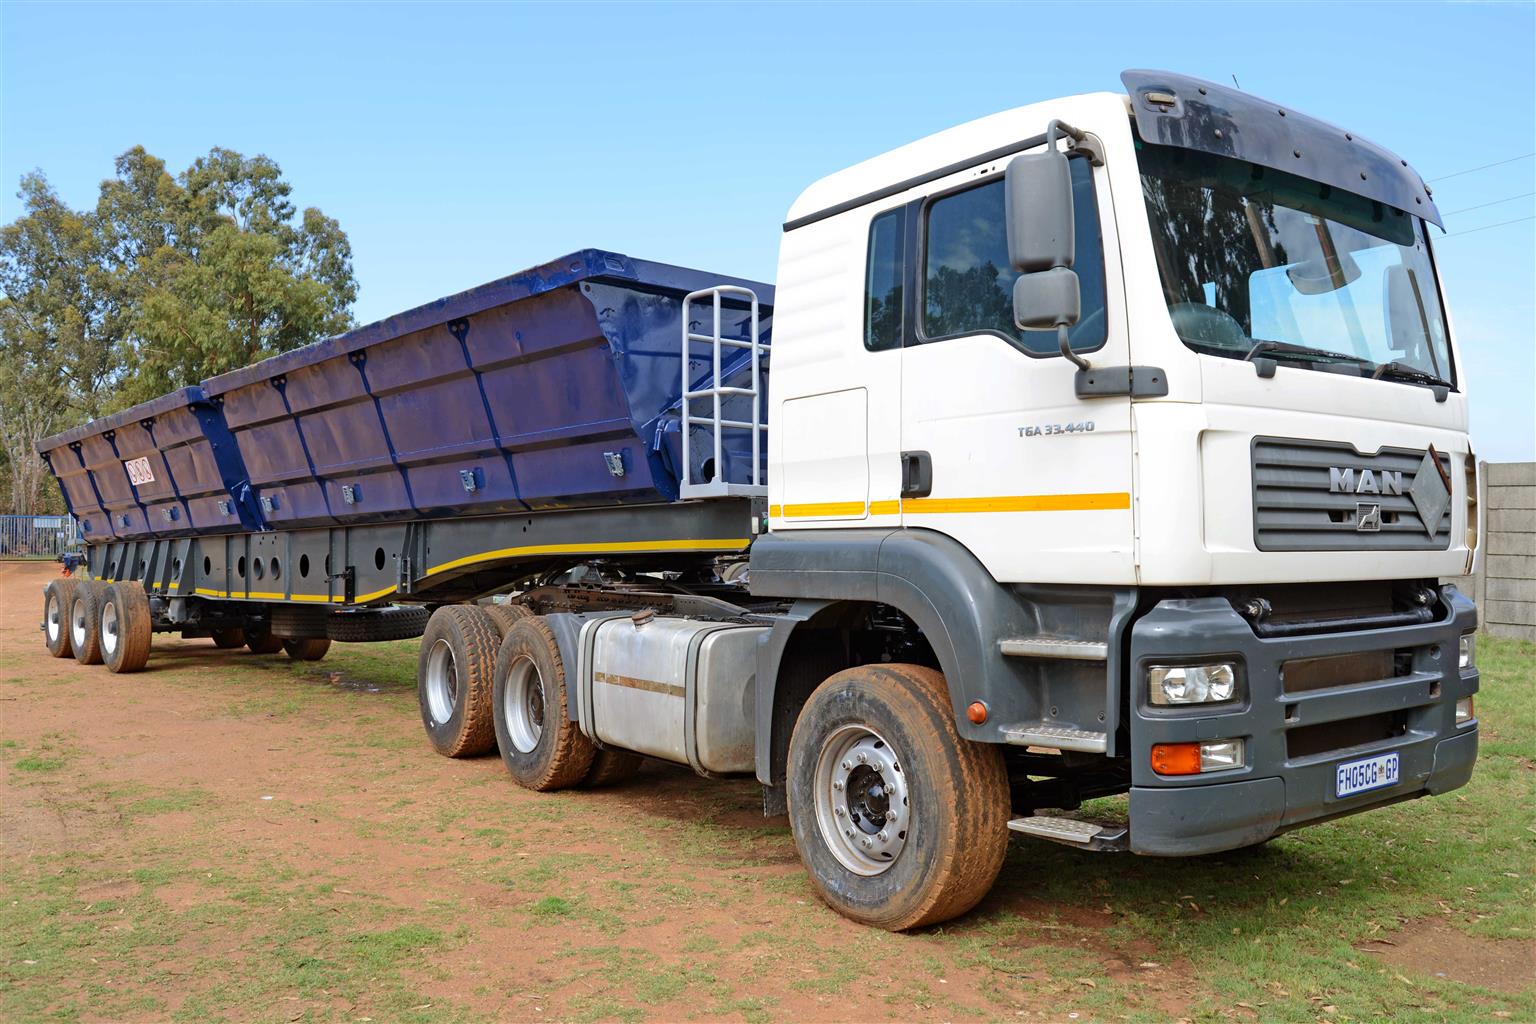 Start Your Own Trucking Business, 34 Ton Side Tippers, Become A Trucker In Gaborone, Botswana